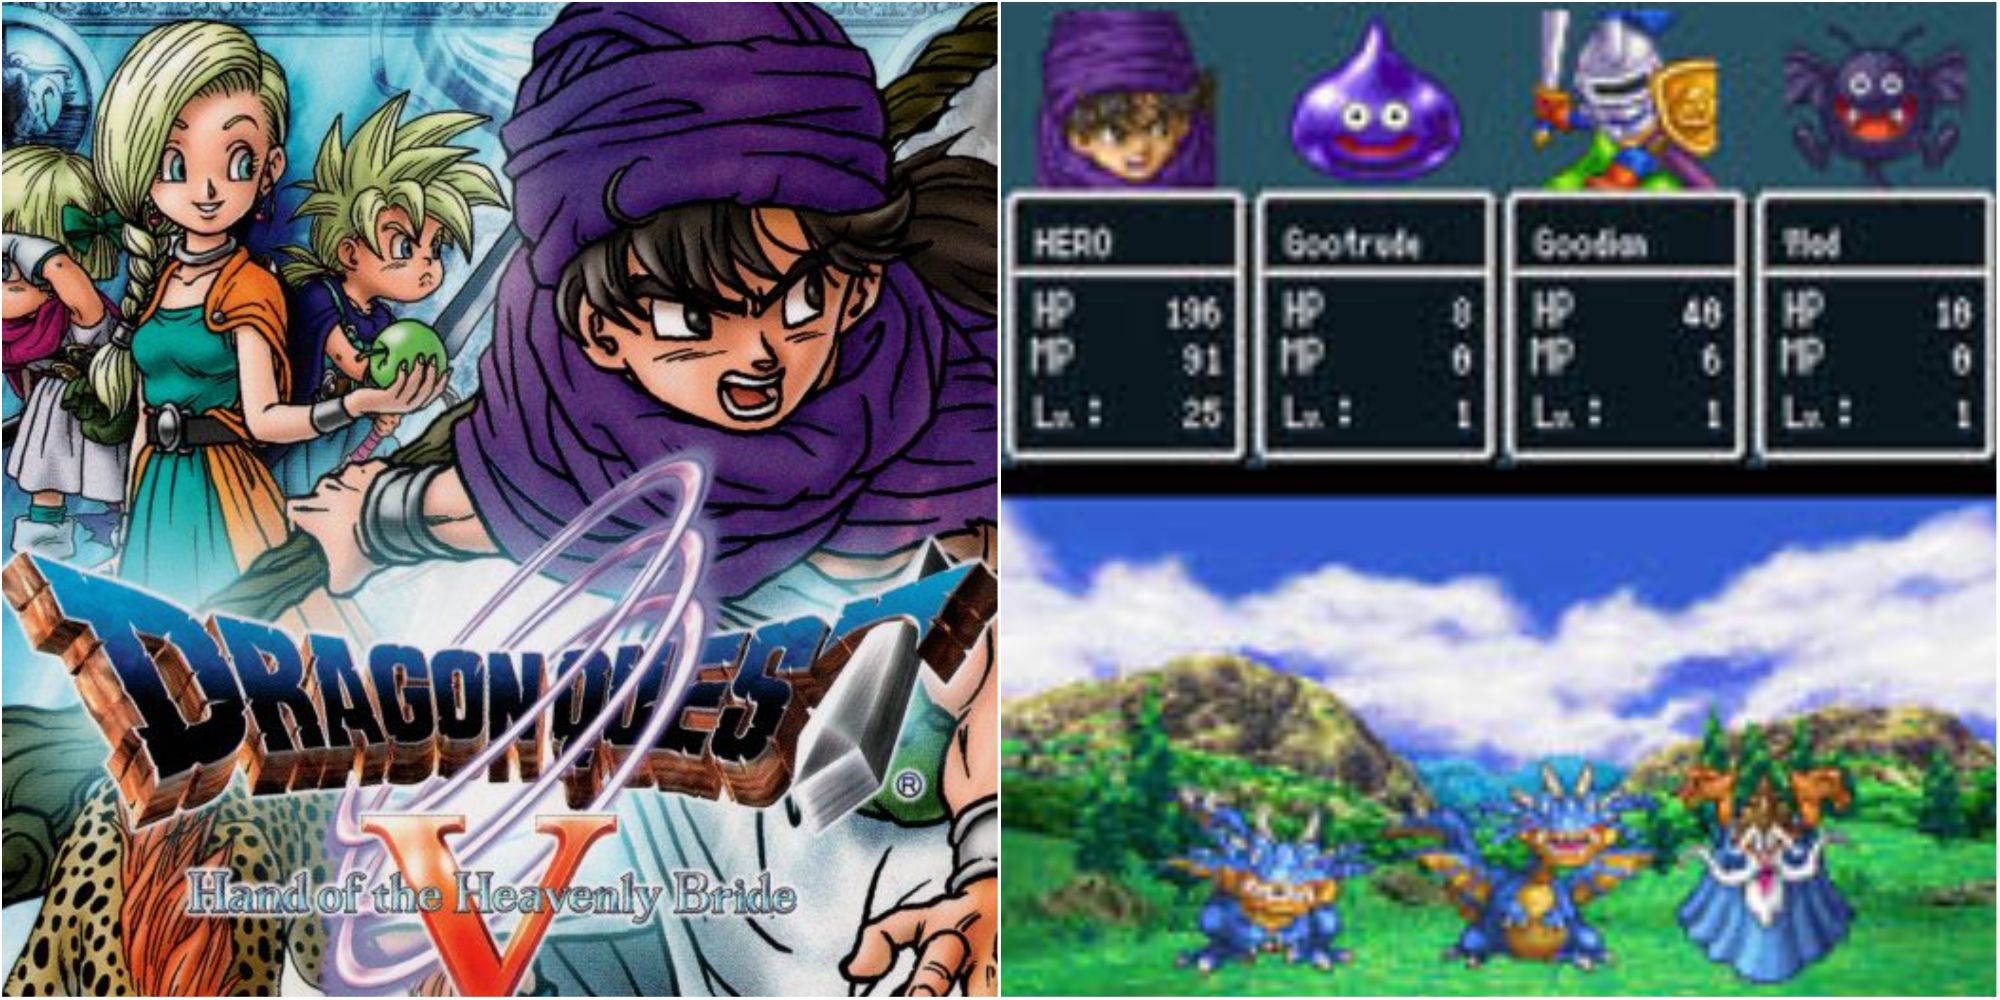 dragon quest v cover art and gameplay